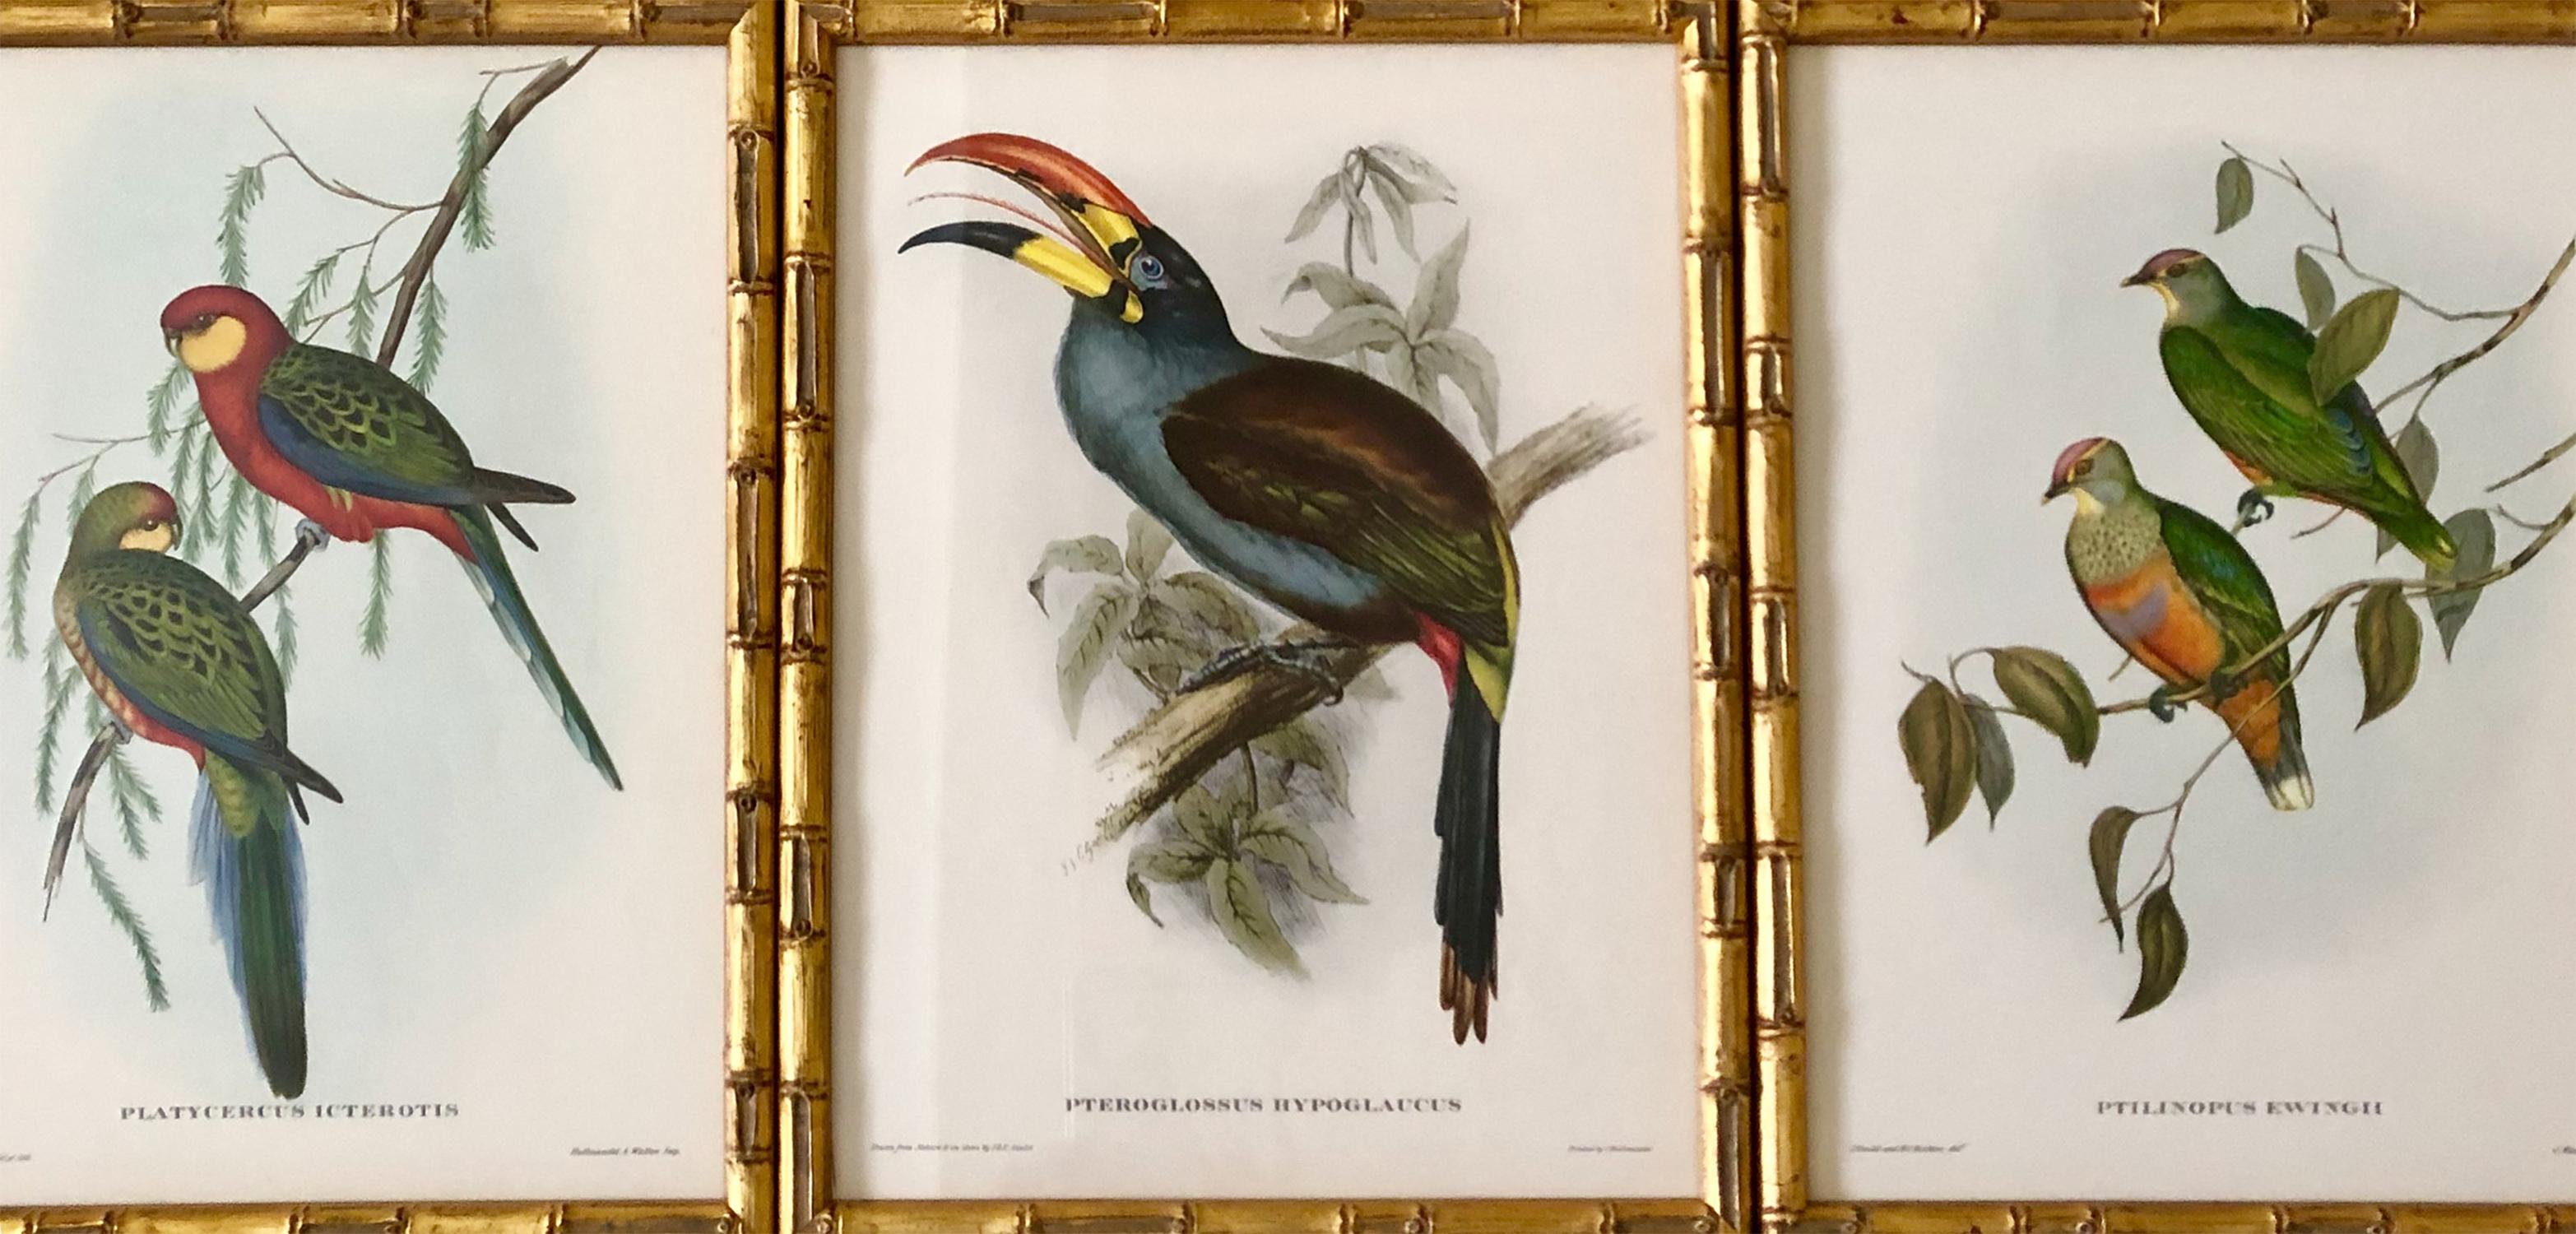 A fine set of hand colored lithographs from 1955 edition of Tropical Birds by J Gould, lithographs by C Hullmandel. Presented in bespoke handmade gilt bamboo frames behind Tru Vu glass which affords the prints some protection.